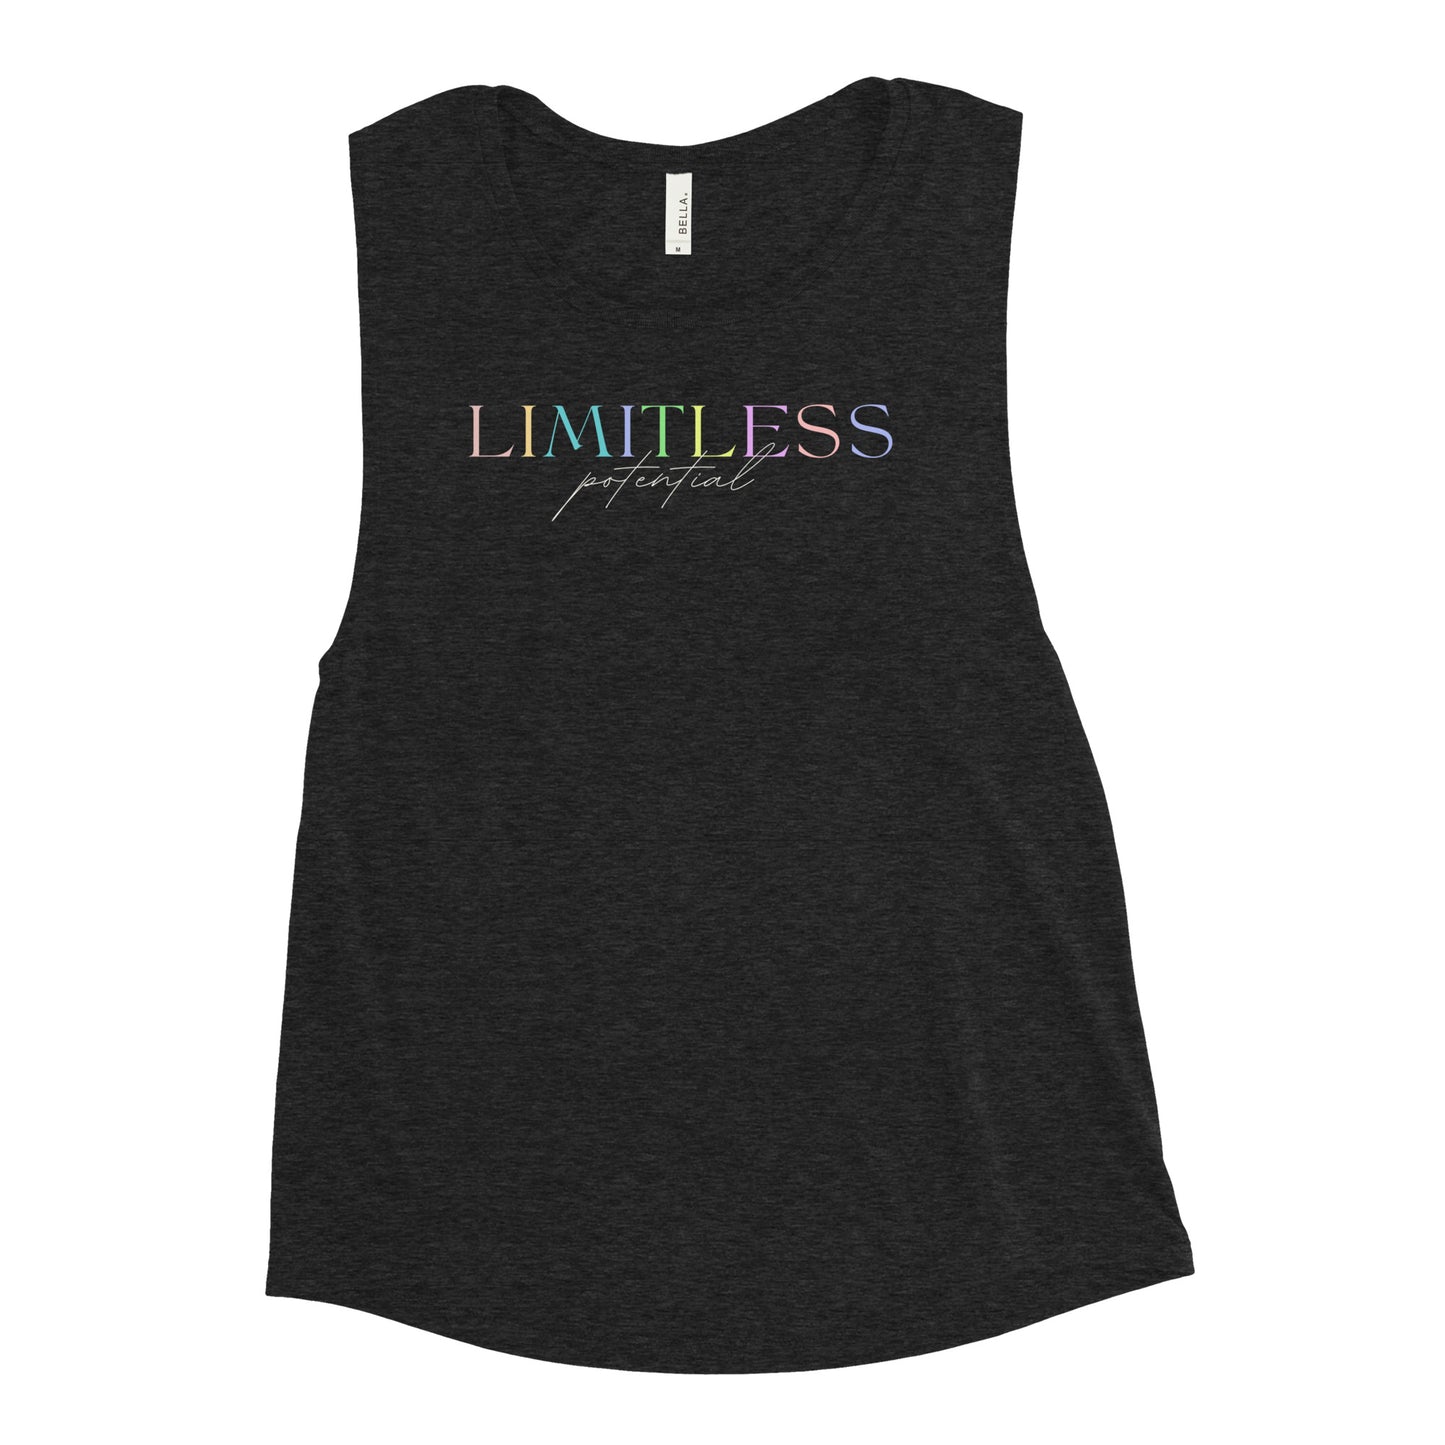 Limitless Potential Muscle Tank